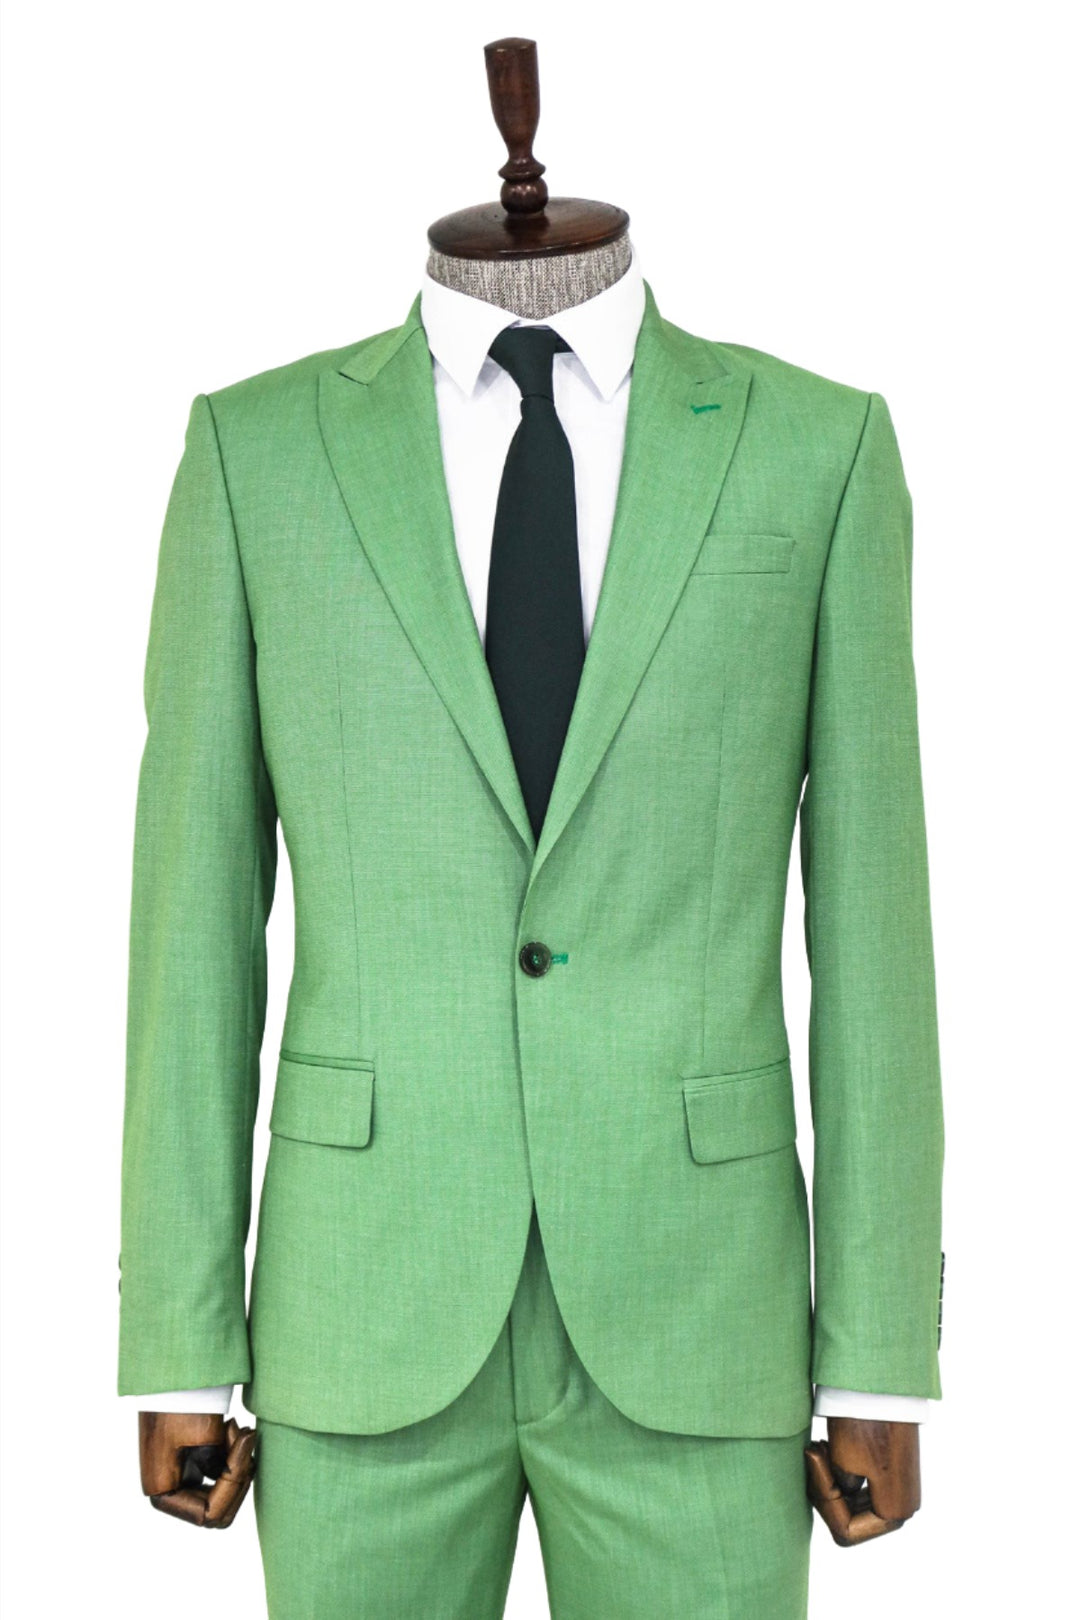 2 Piece Patterned Slim Fit Green Men Suit and Shirt Combination - Wessi